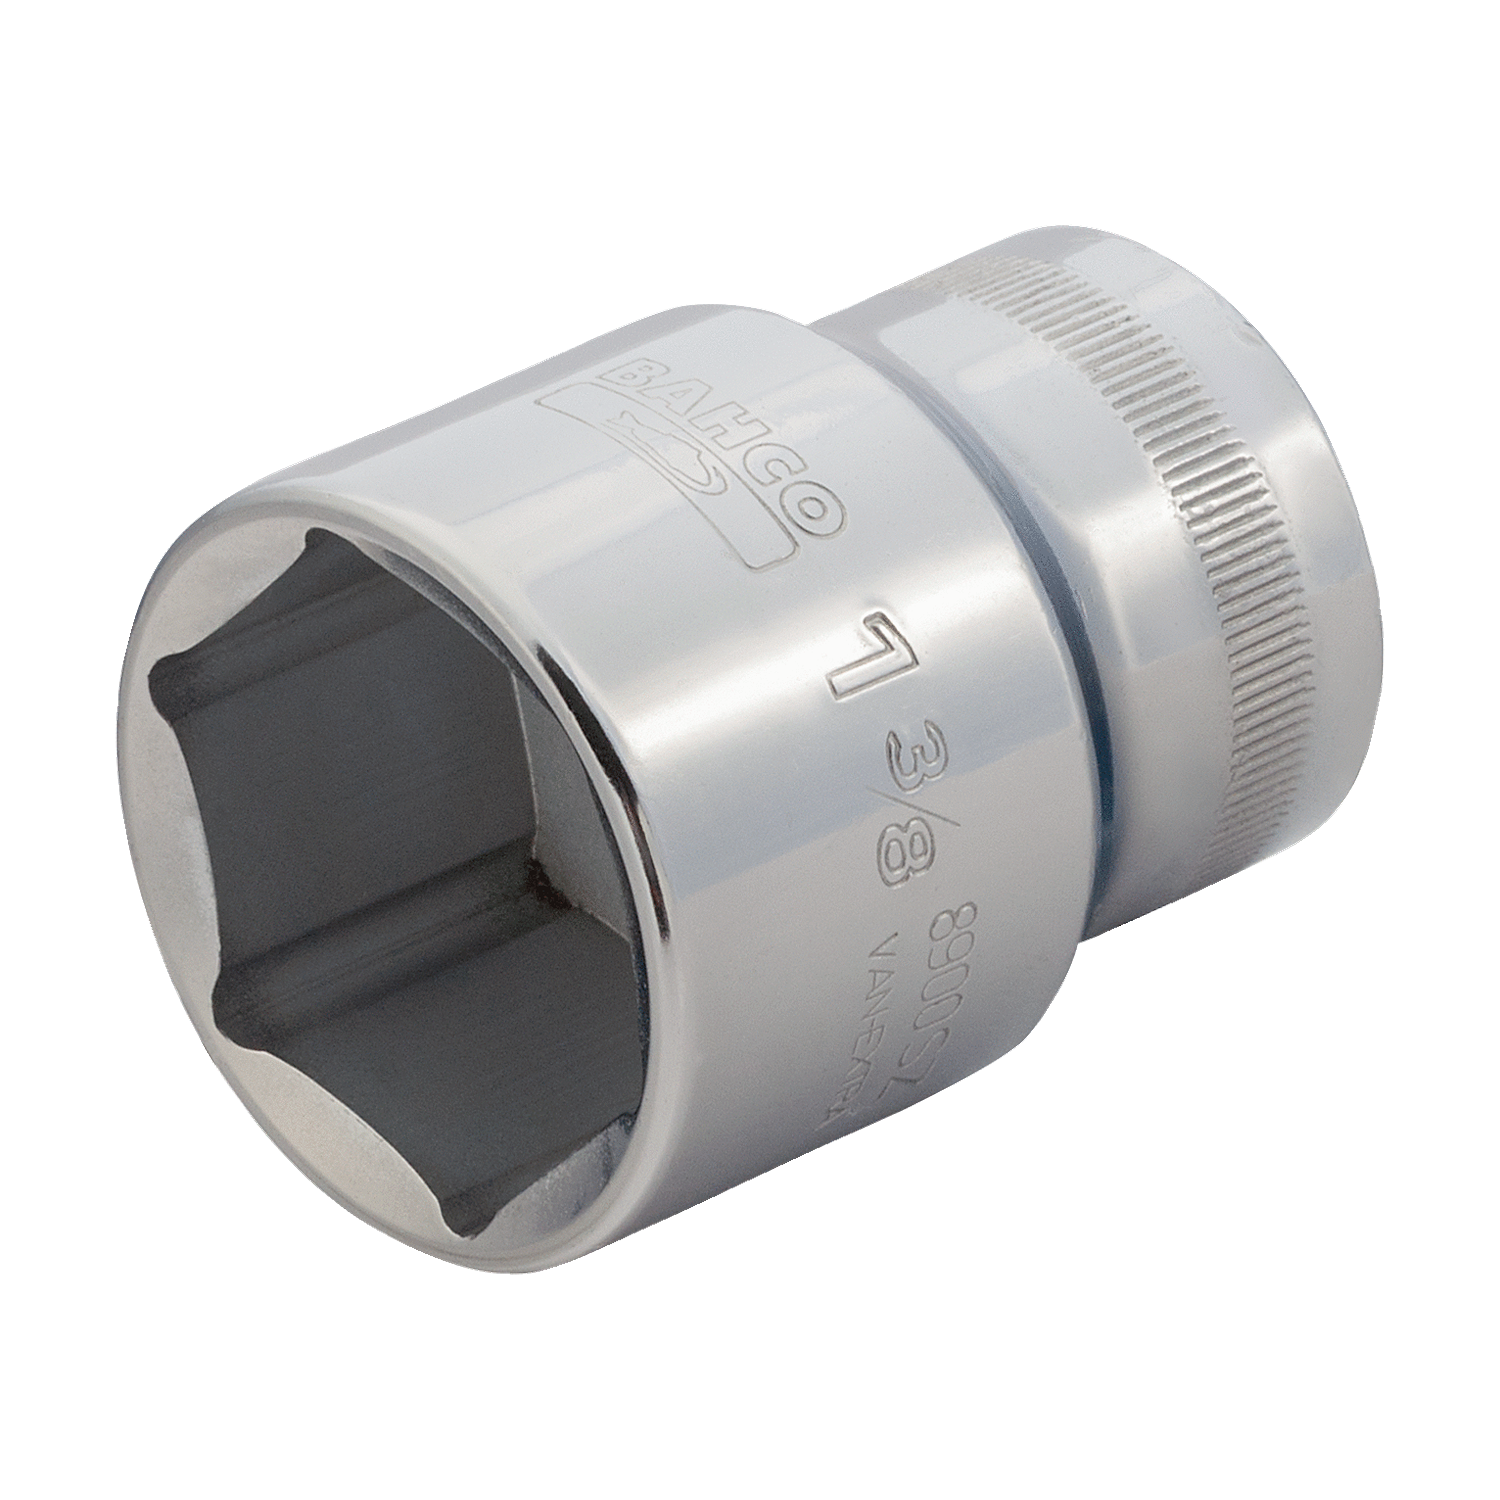 BAHCO 8900SZ 3/4" Square Drive Socket With Imperial Hex Profile - Premium Square Drive Socket from BAHCO - Shop now at Yew Aik.